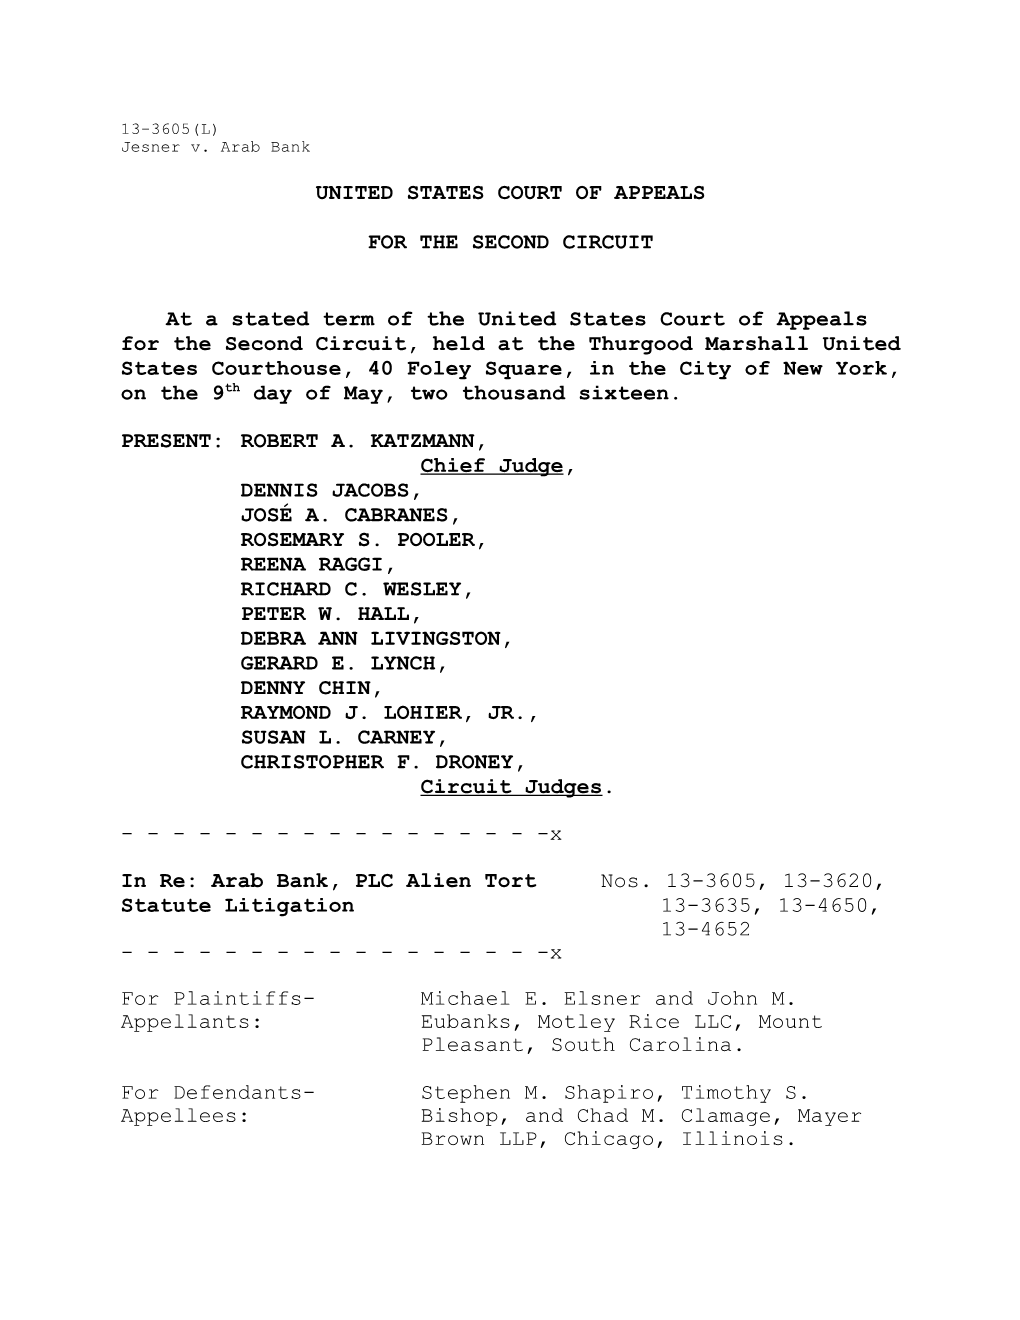 Second Circuit Order Denying Petition